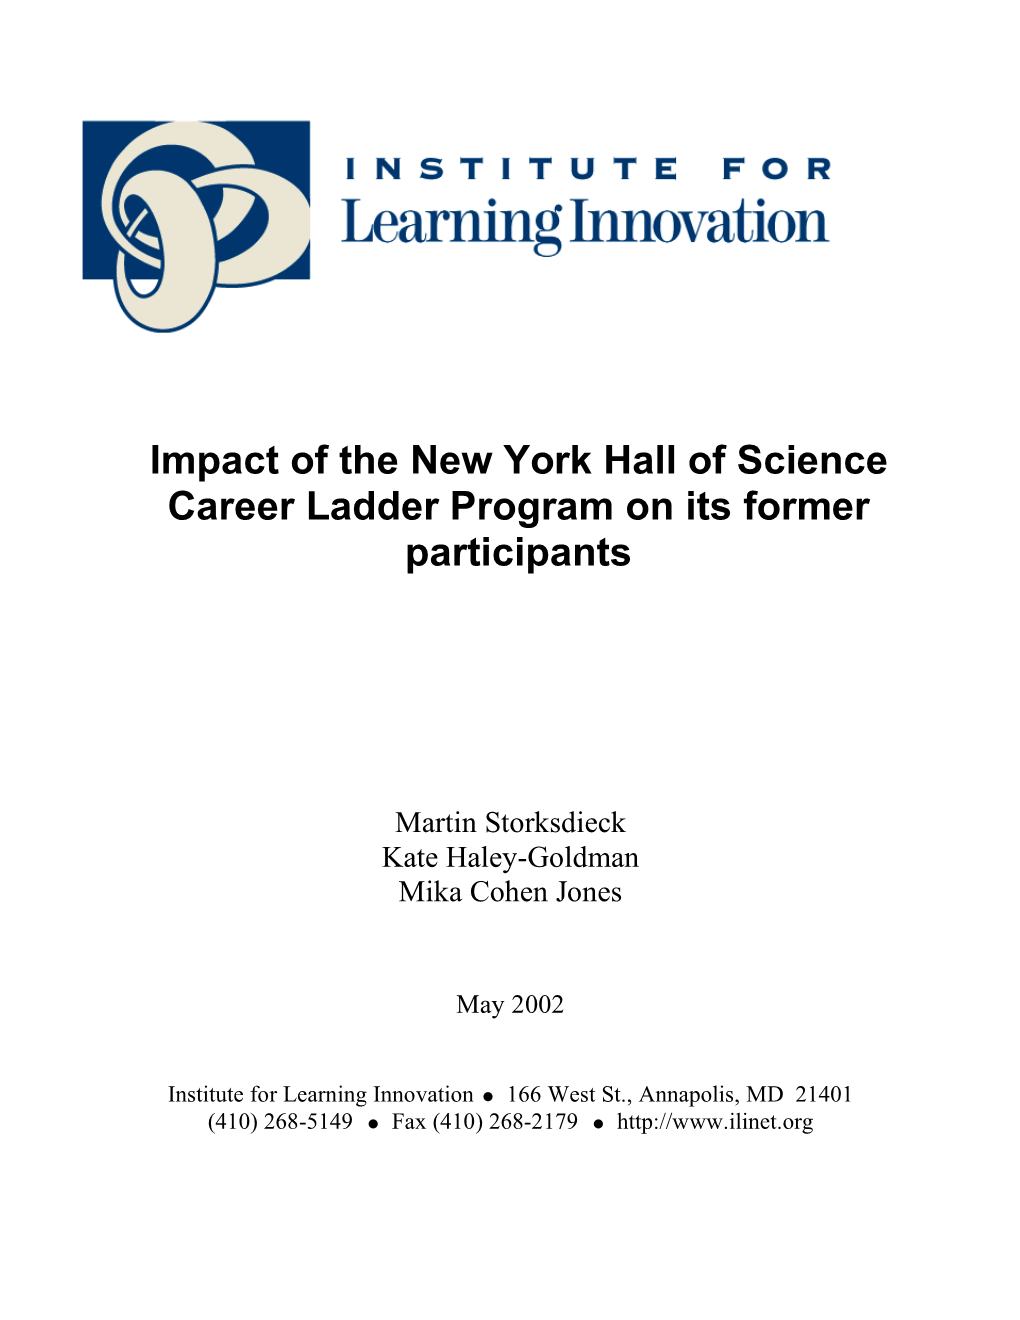 Impact of the New York Hall of Science Career Ladder Program on Its Former Participants